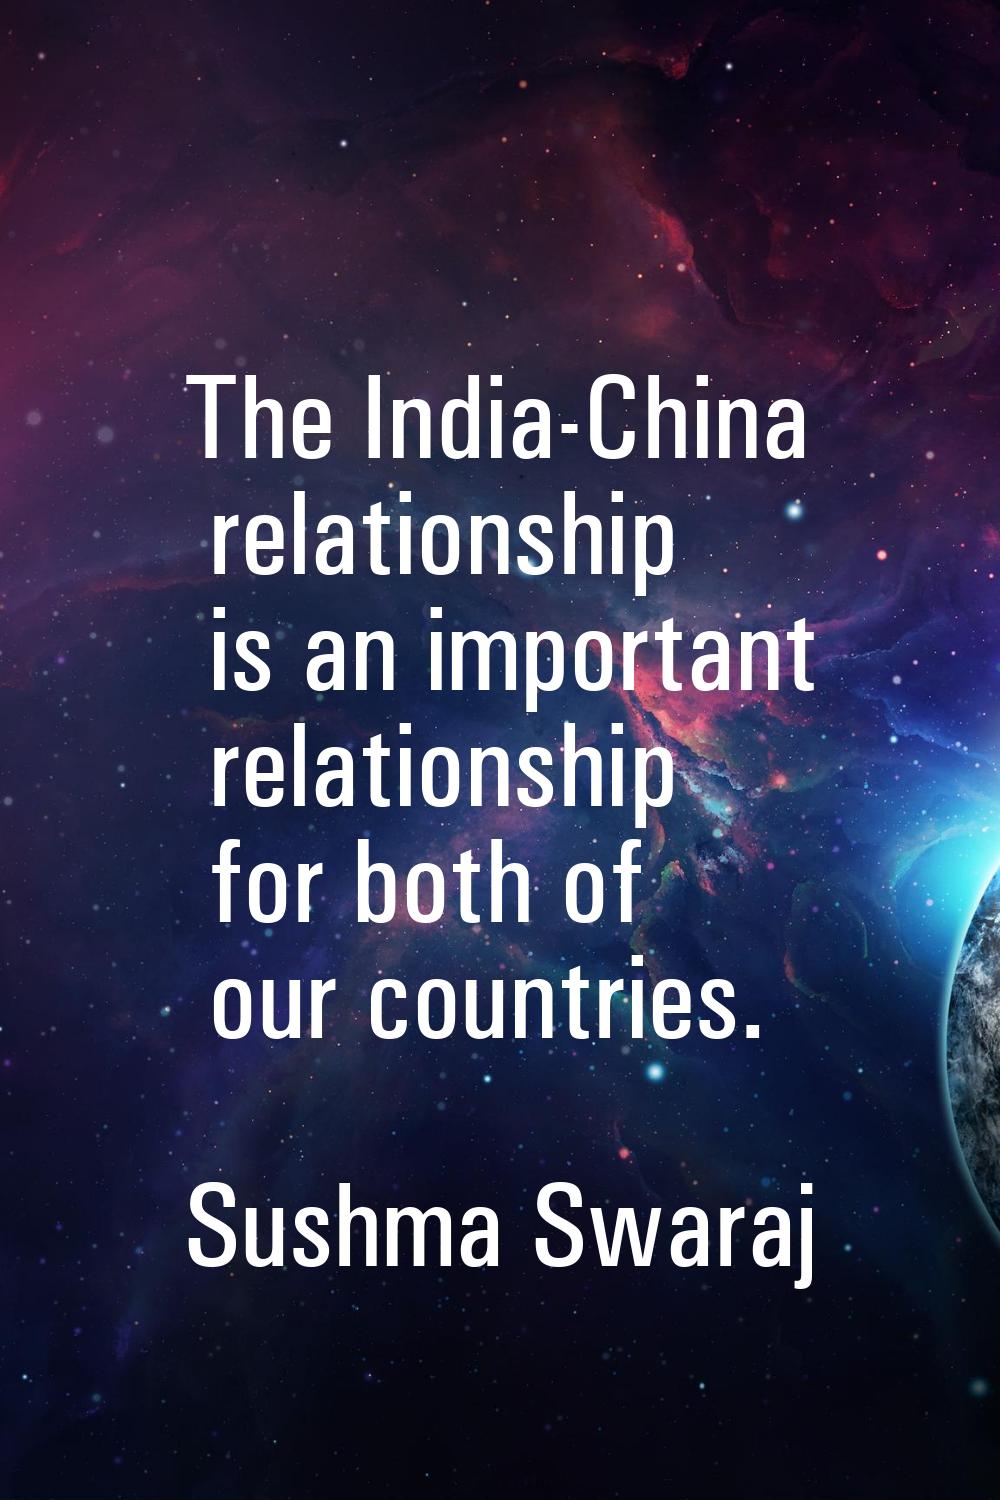 The India-China relationship is an important relationship for both of our countries.